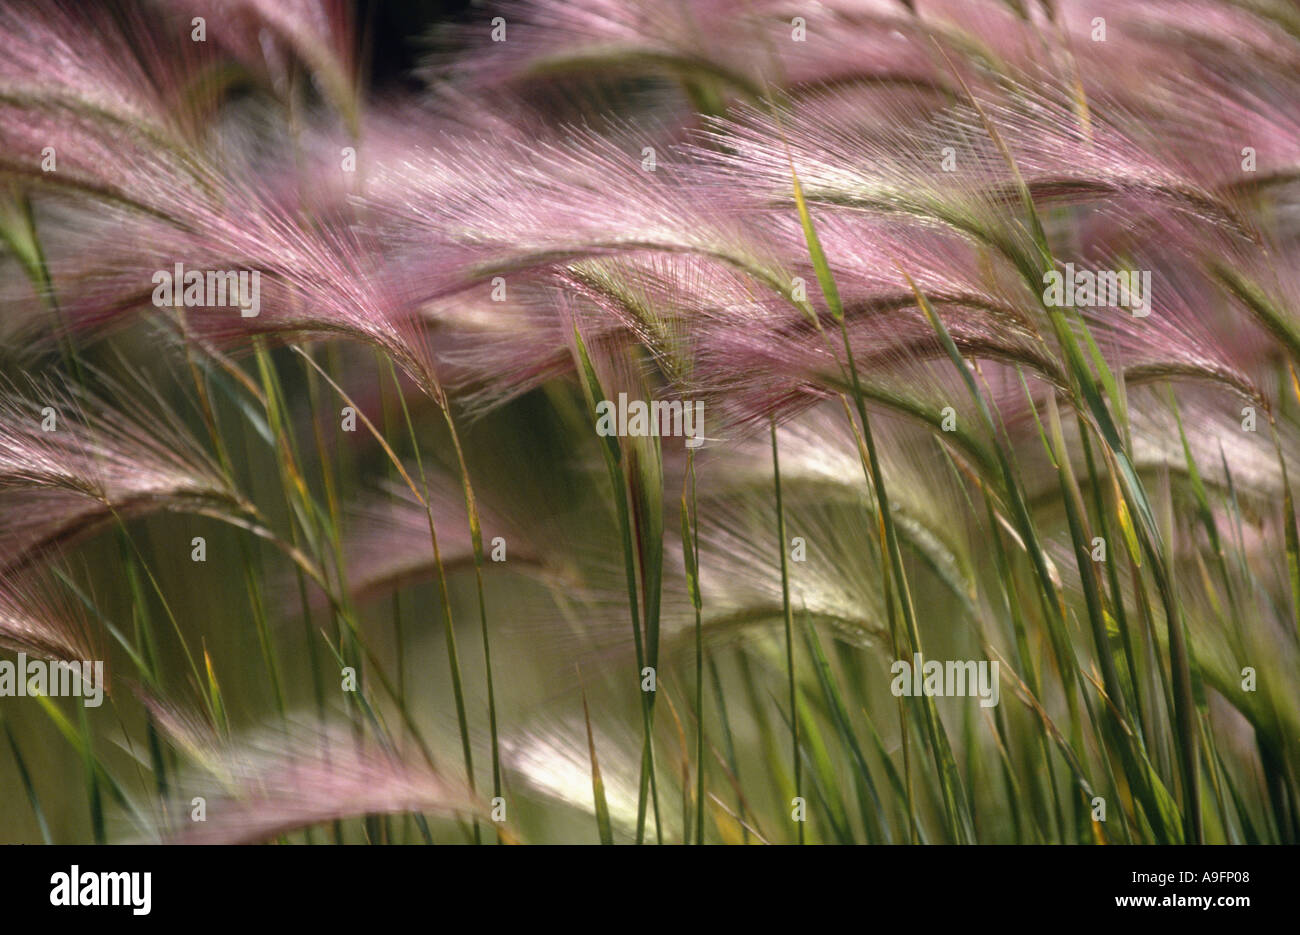 wild barley, foxtail barley, squirrel-tail grass (Hordeum jubatum), spikes blowing in the wind Stock Photo